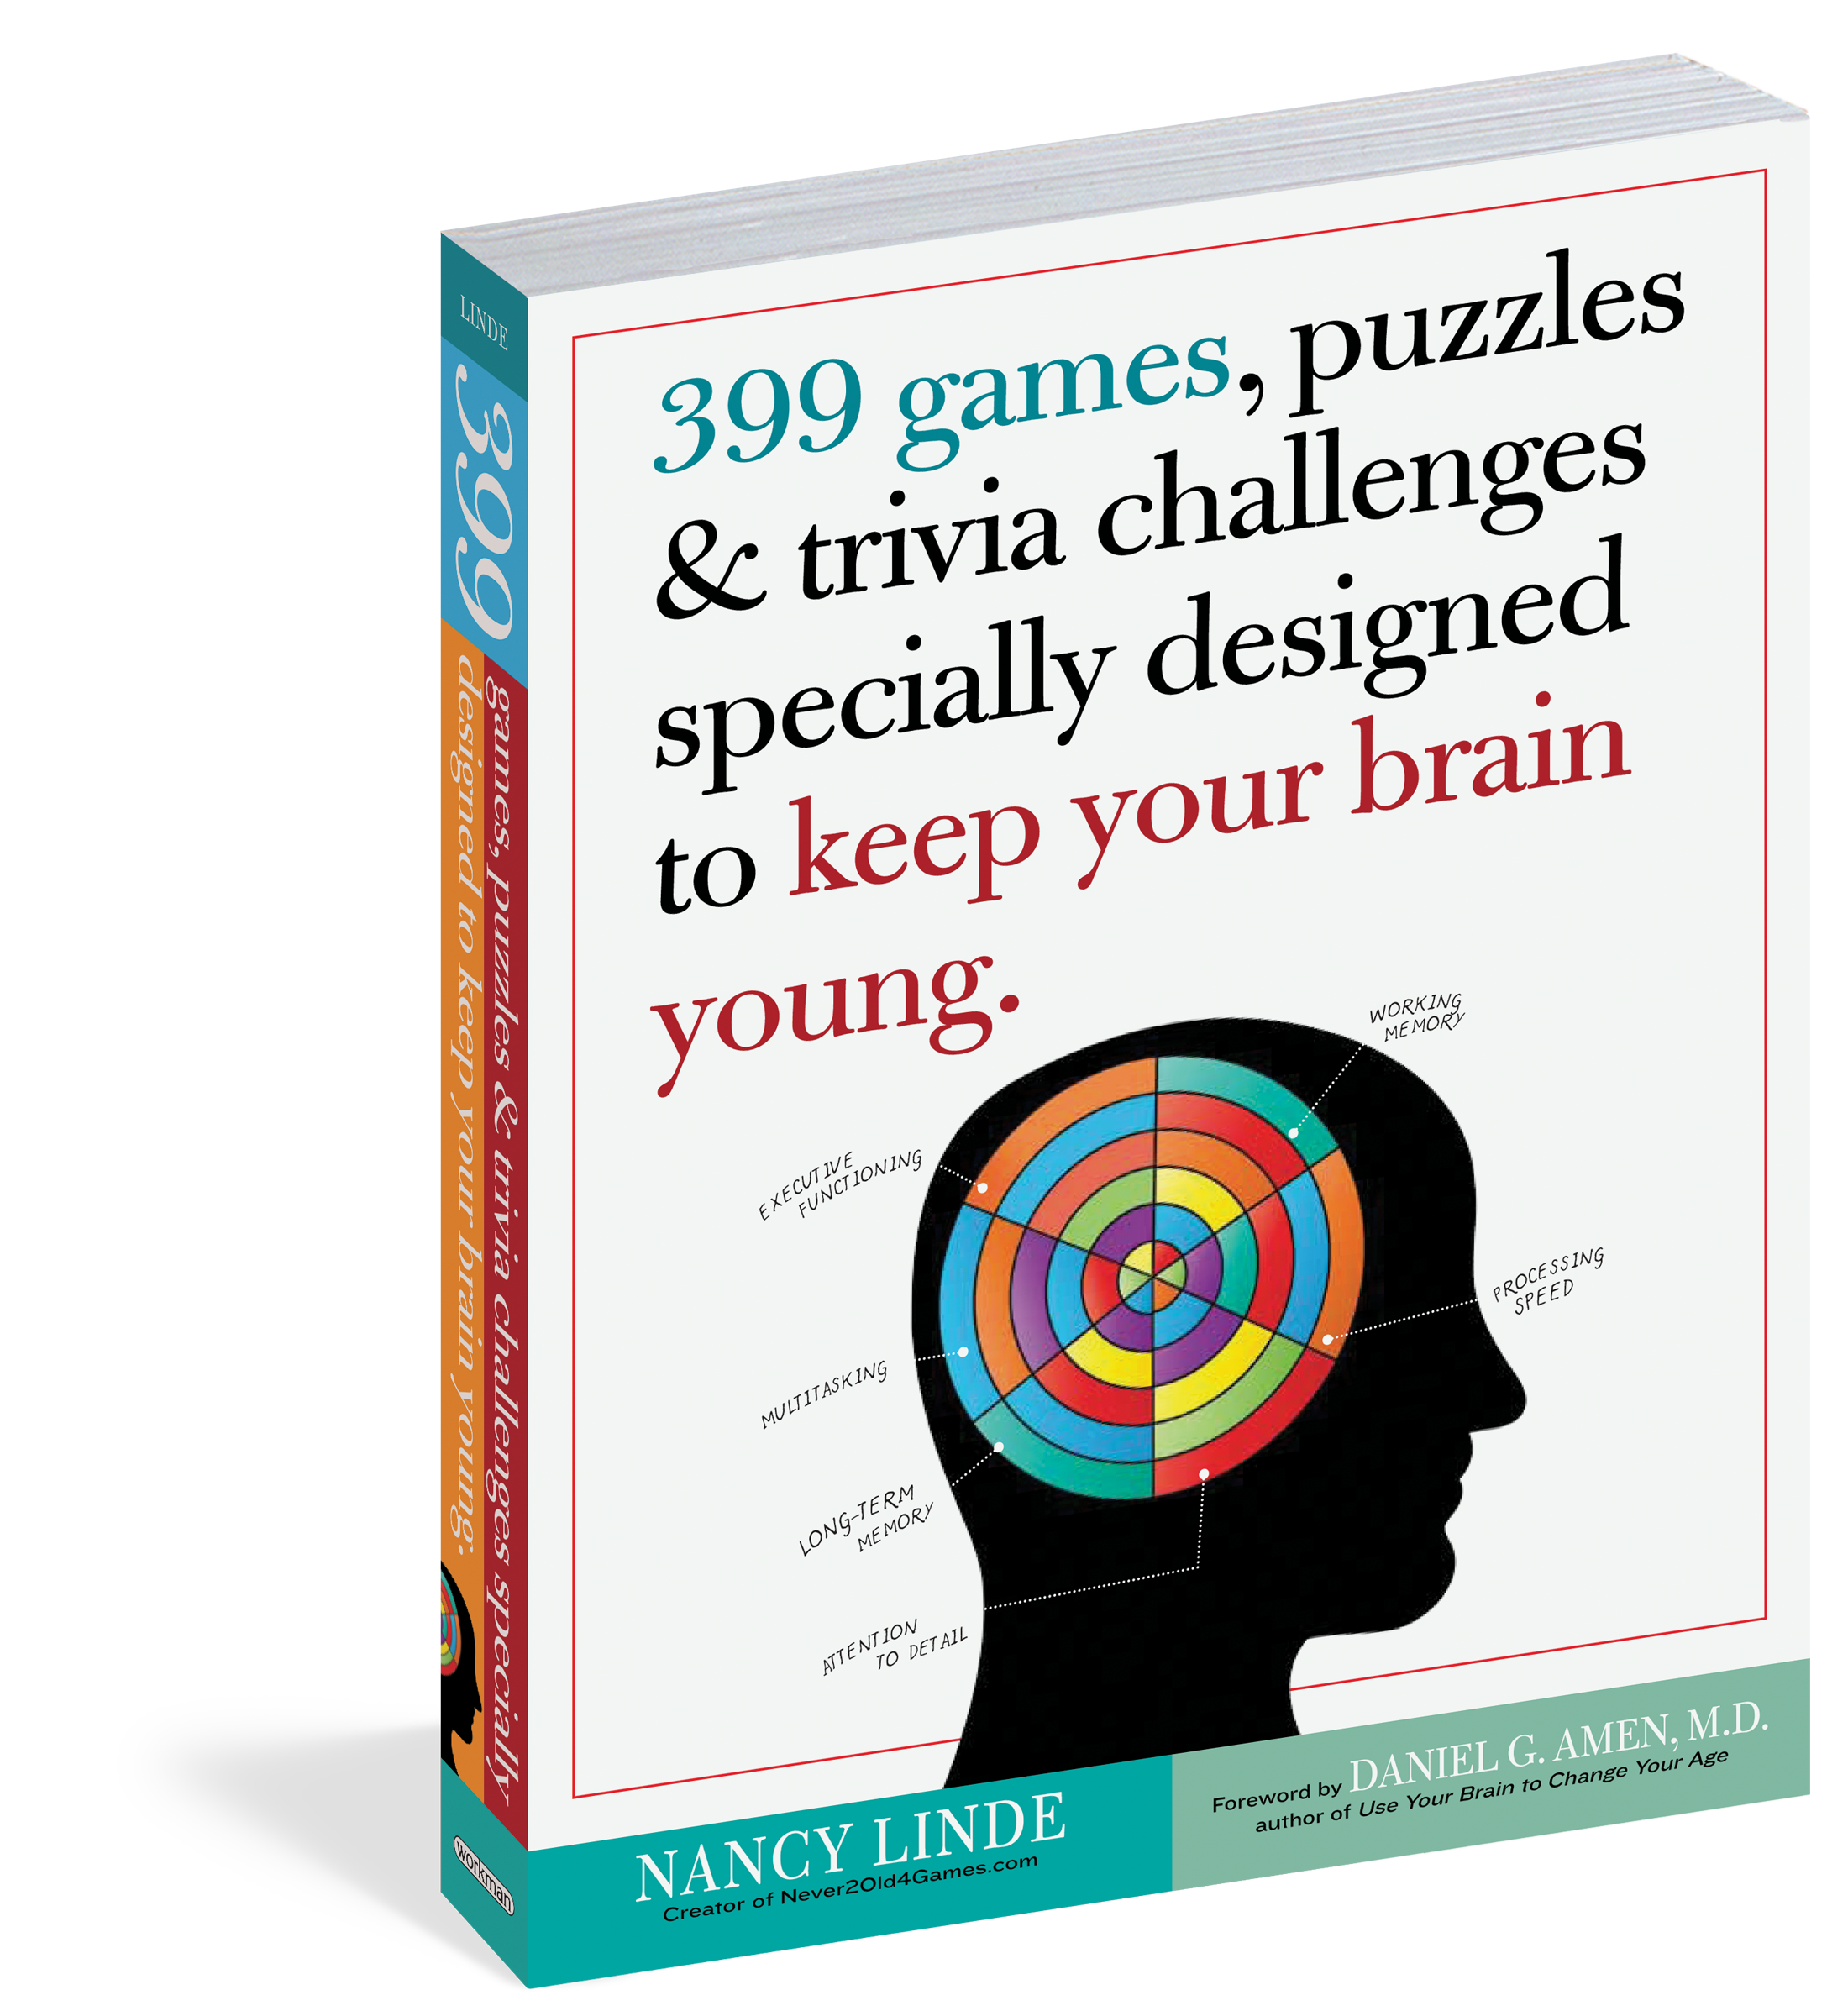 399 Games, Puzzles & Trivia Challenges Specially Designed to Keep Your Brain Young    